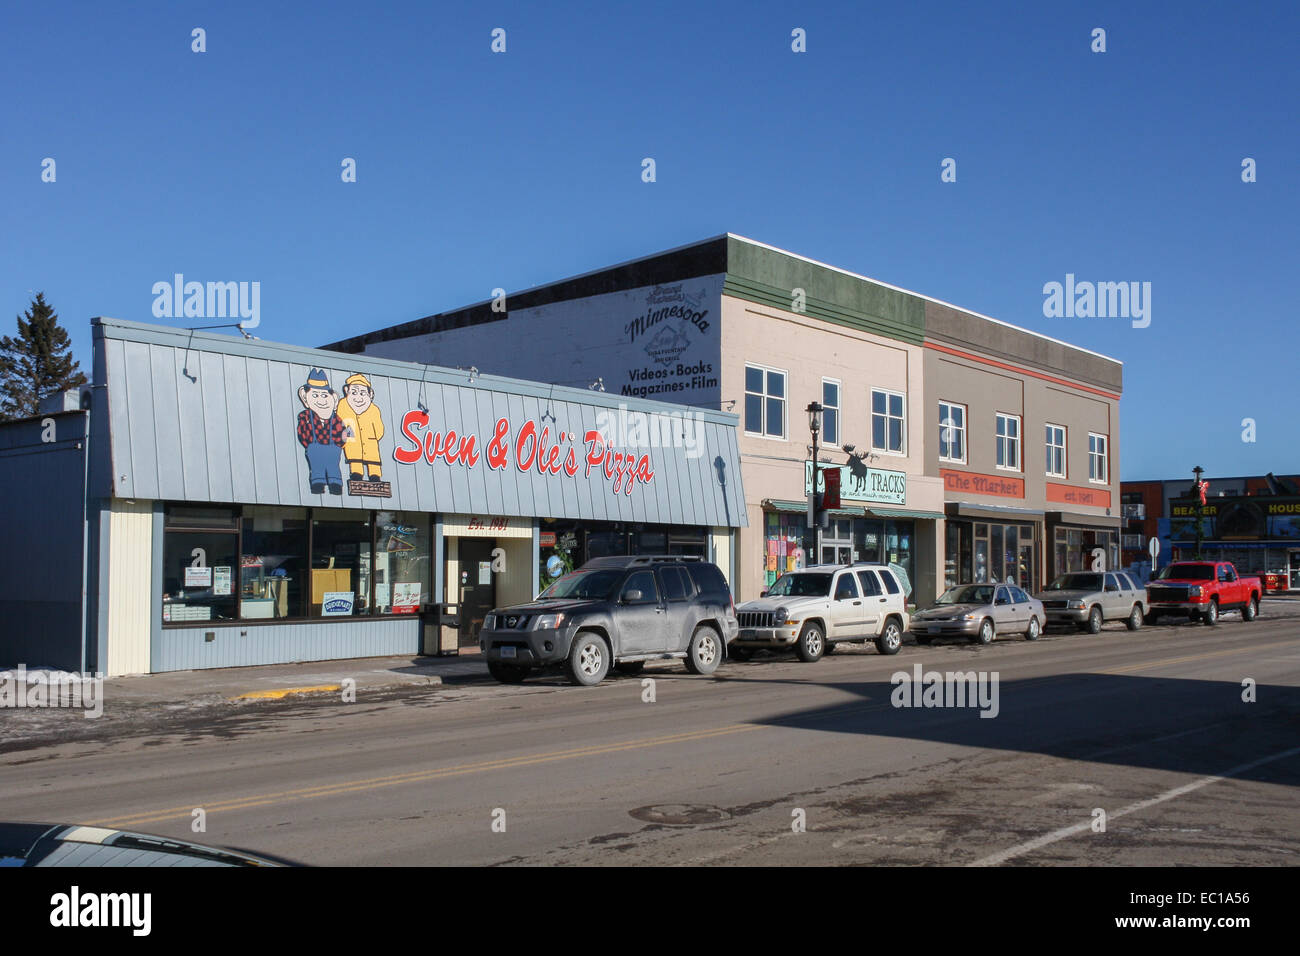 Grand Marais, Minnesota, United States. Sven and Ole's Pizza place in town Stock Photo